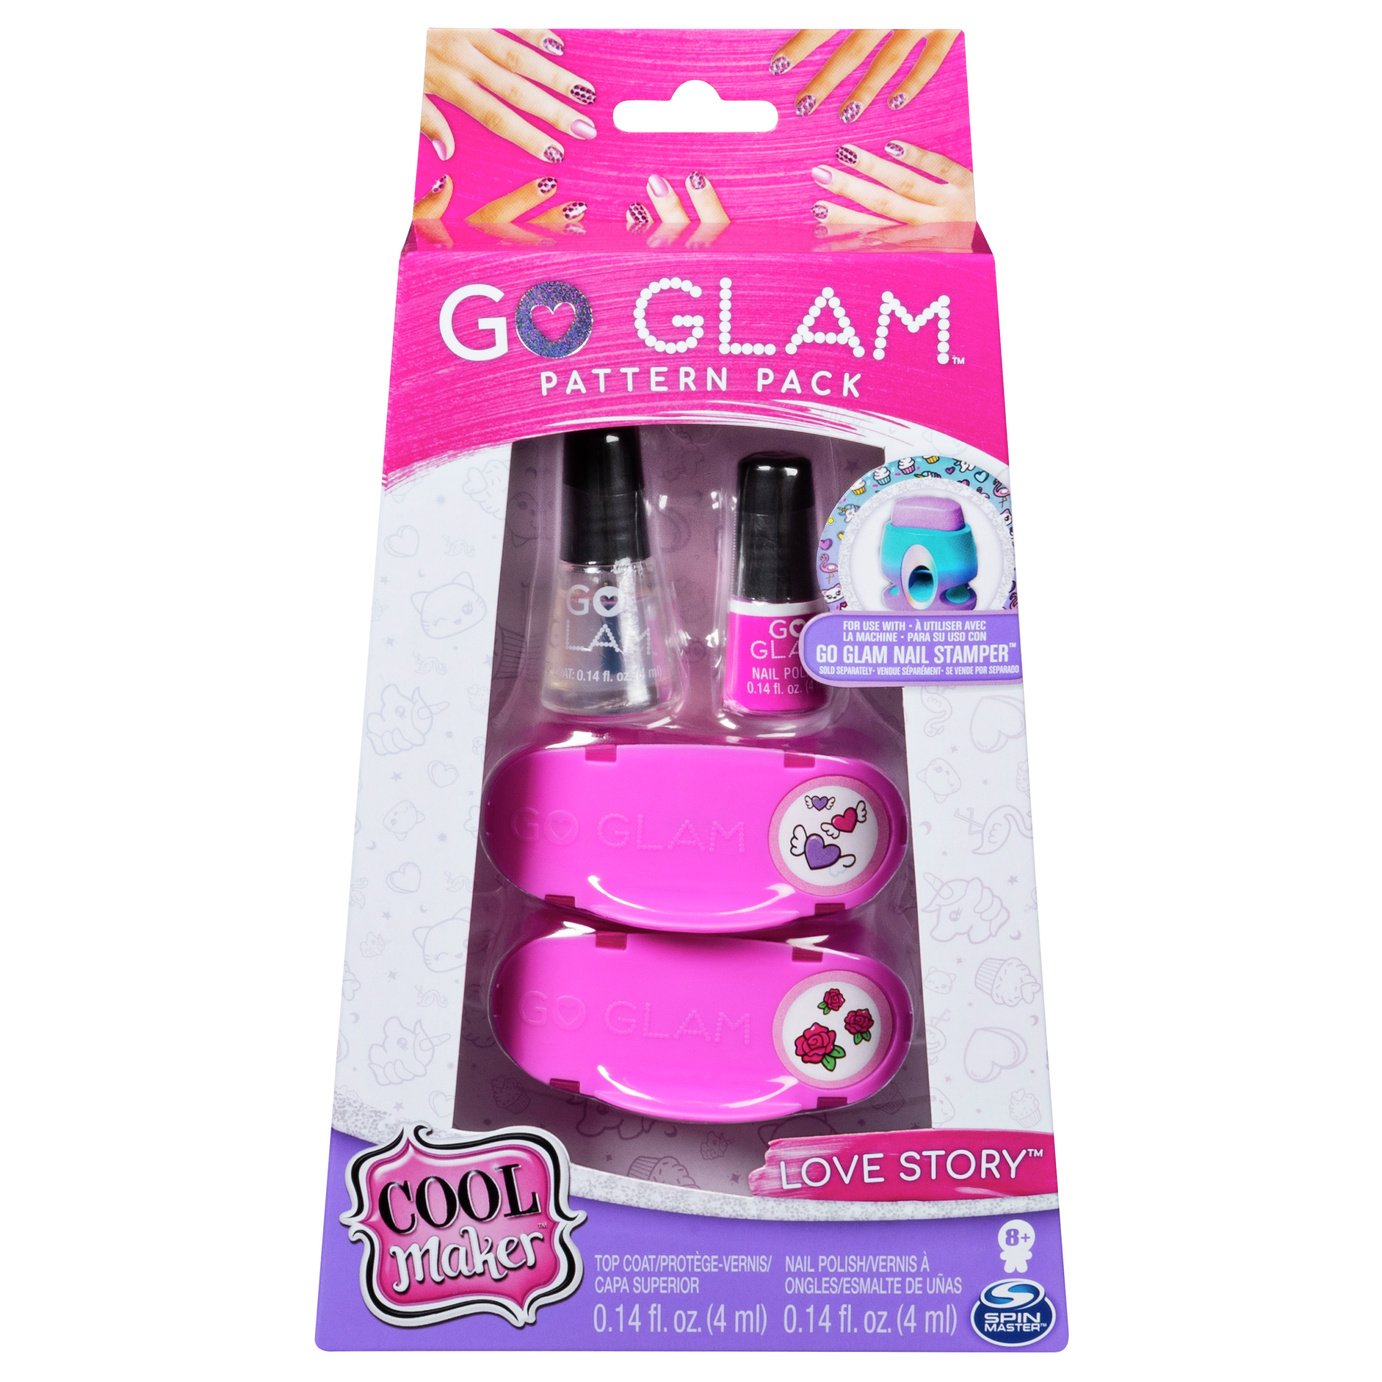 GO GLAM Nail Stamper Refills Review